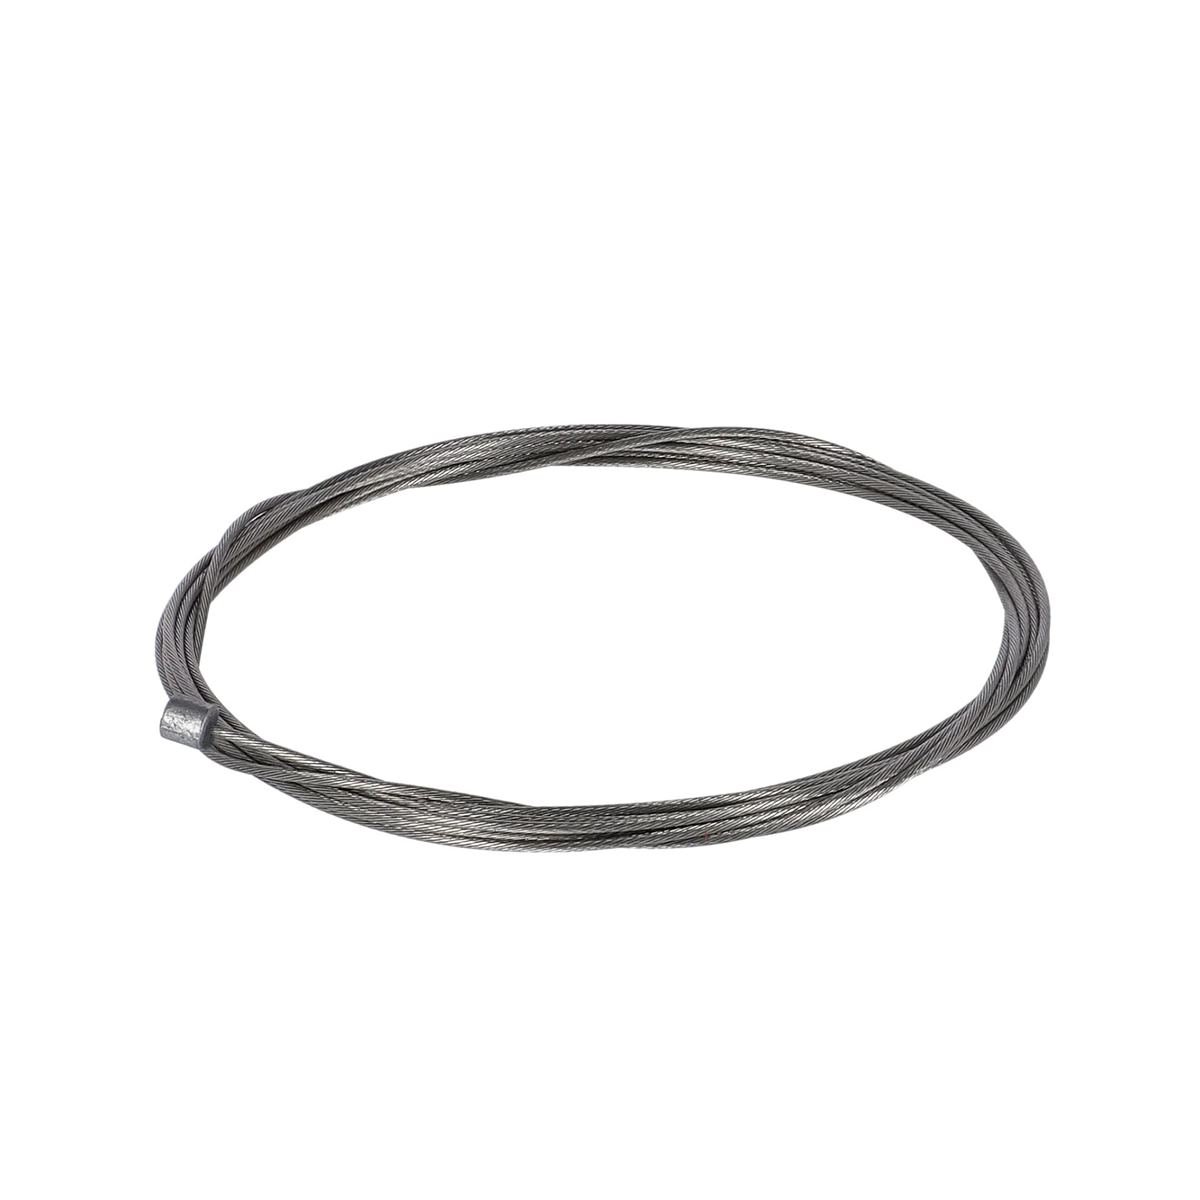 SRAM Shift Inner Cable Slickwire 1.1mm x 2300mm